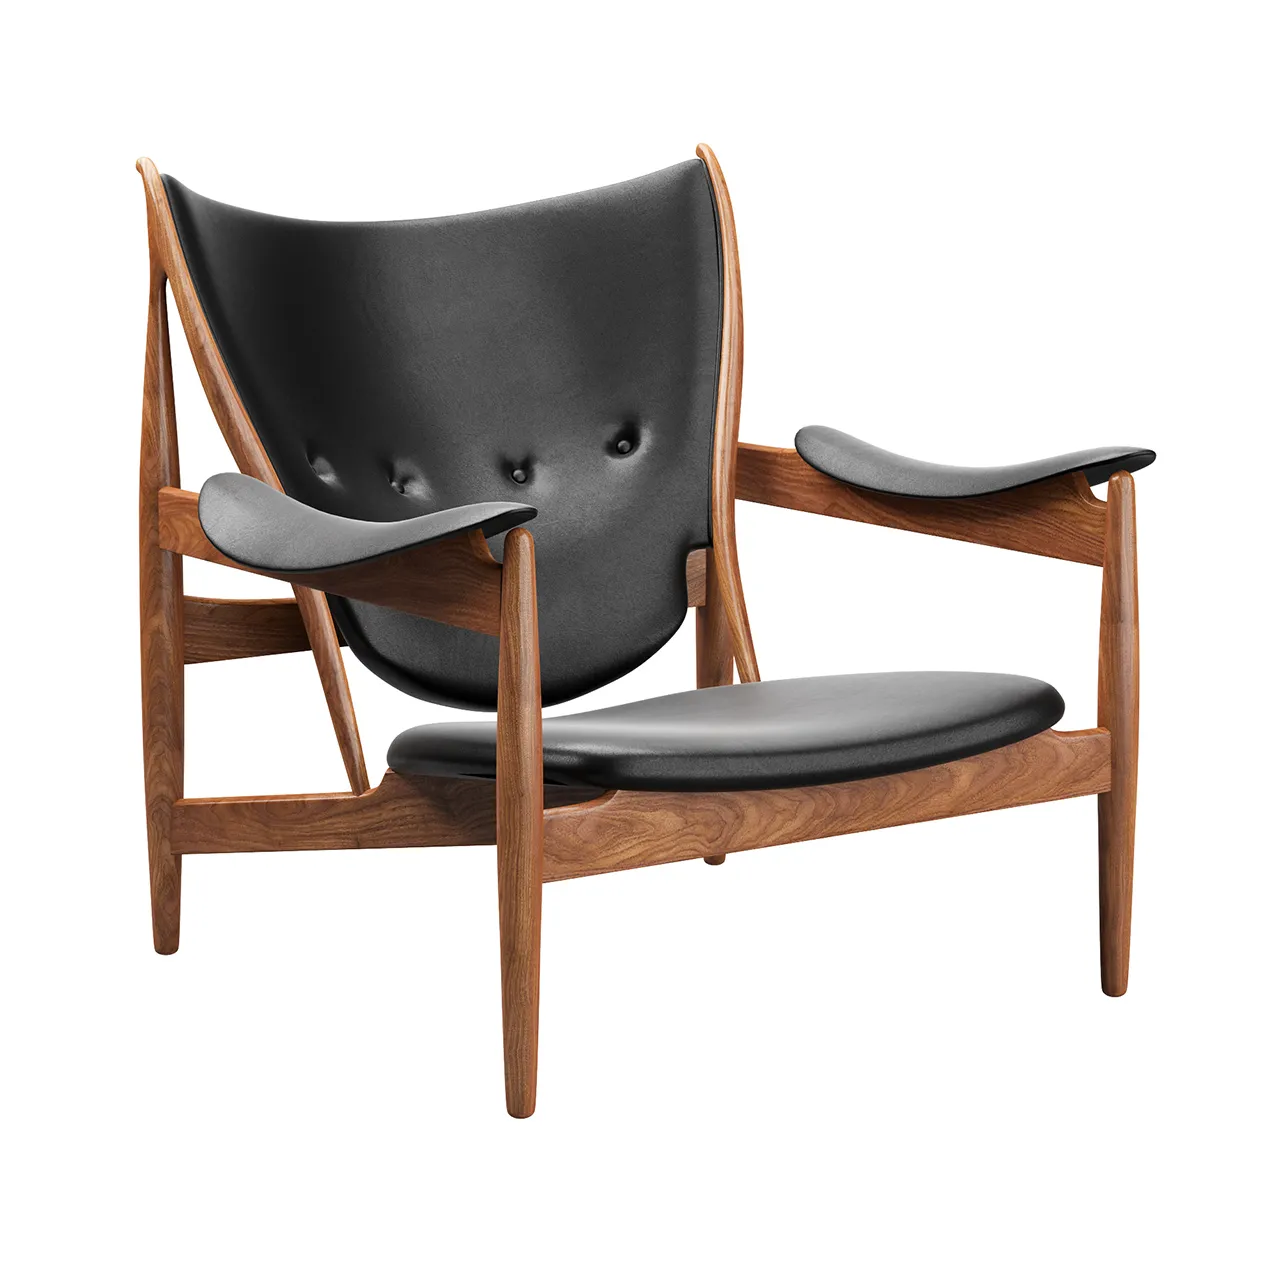 Furniture – chieftains-chair-by-house-of-finn-juhl